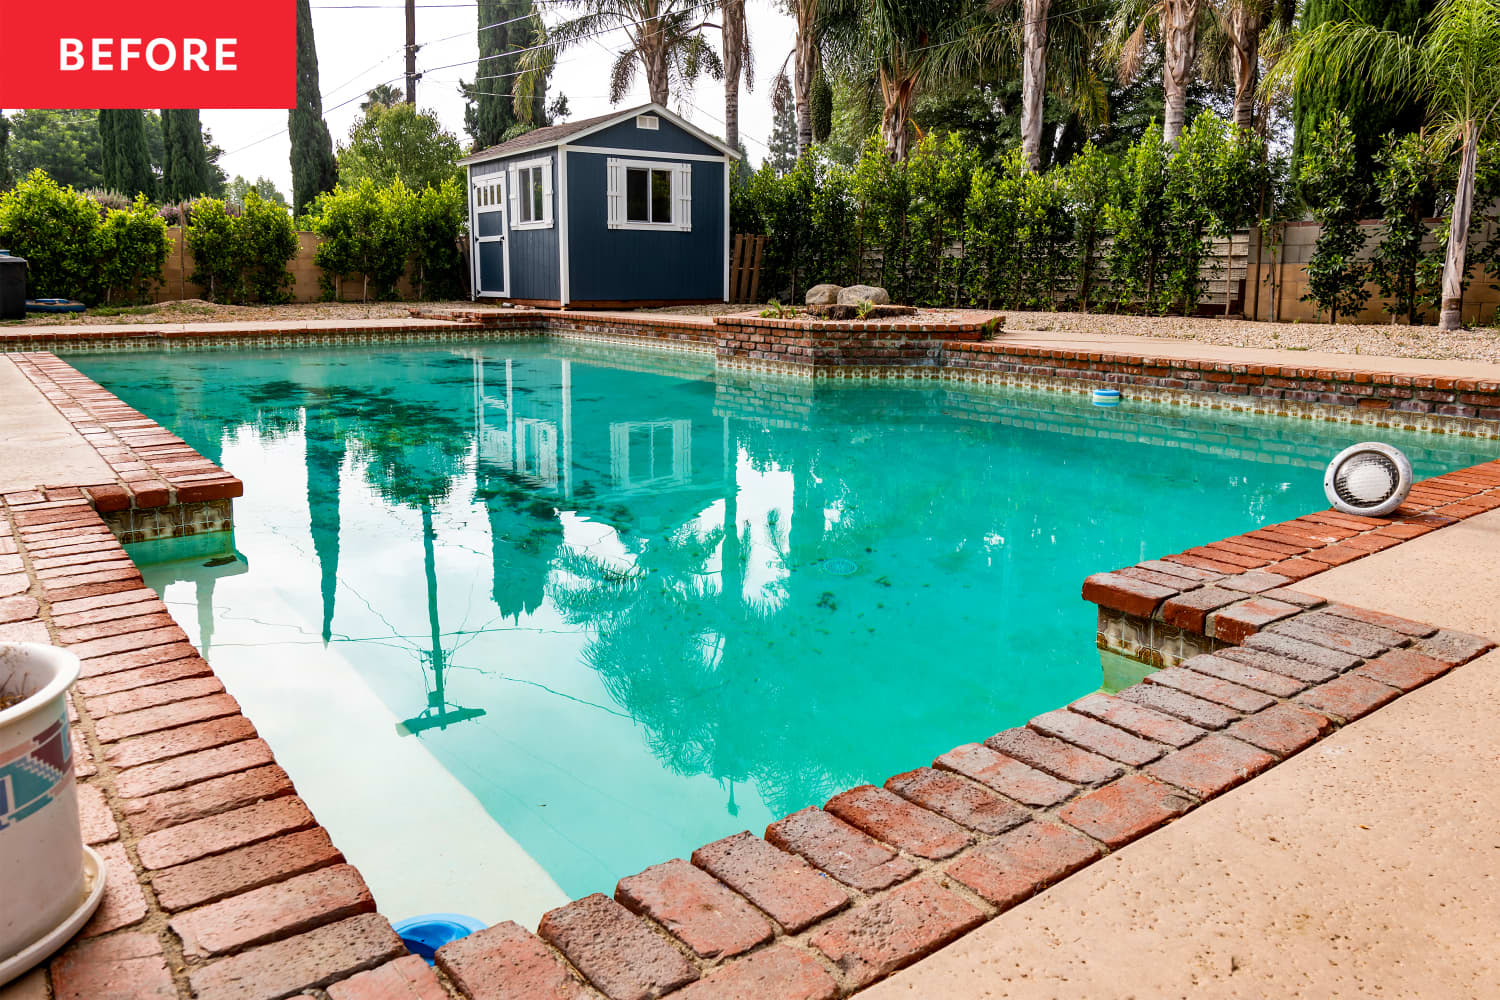 Before and After: Terry Crews Transforms a Worn-Down Backyard and Pool Into a Fitness-Forward Outdoor Oasis